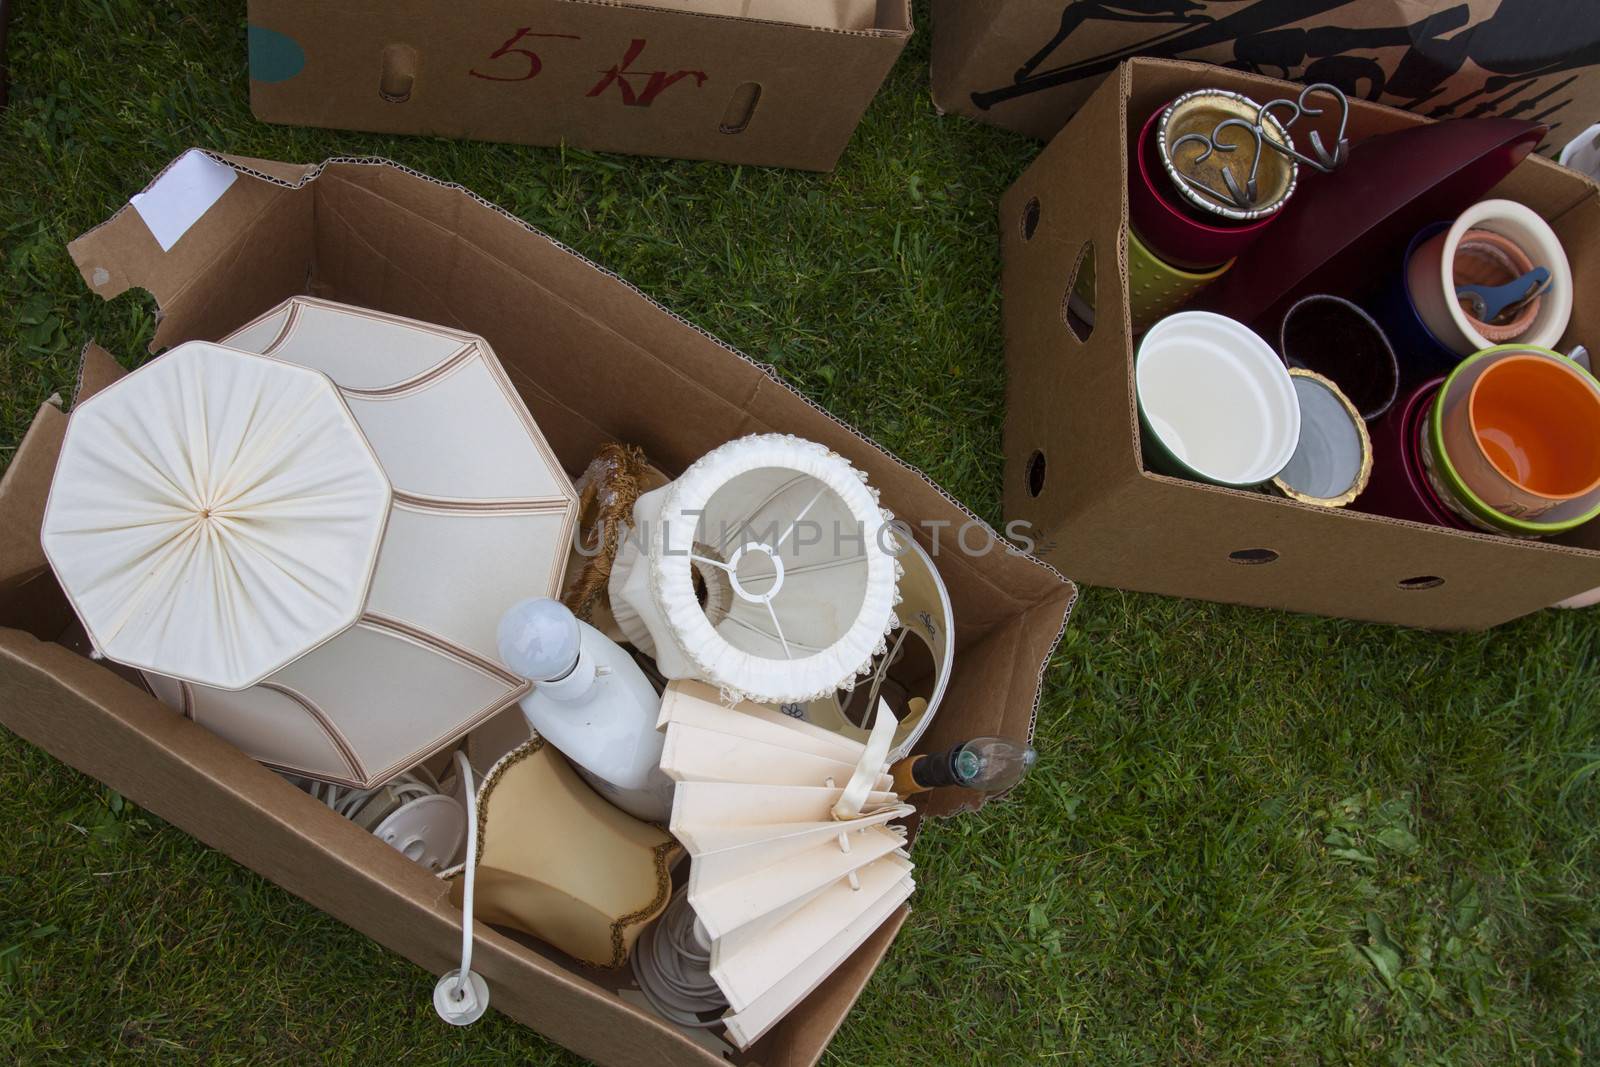 Boxes on yard sale by annems